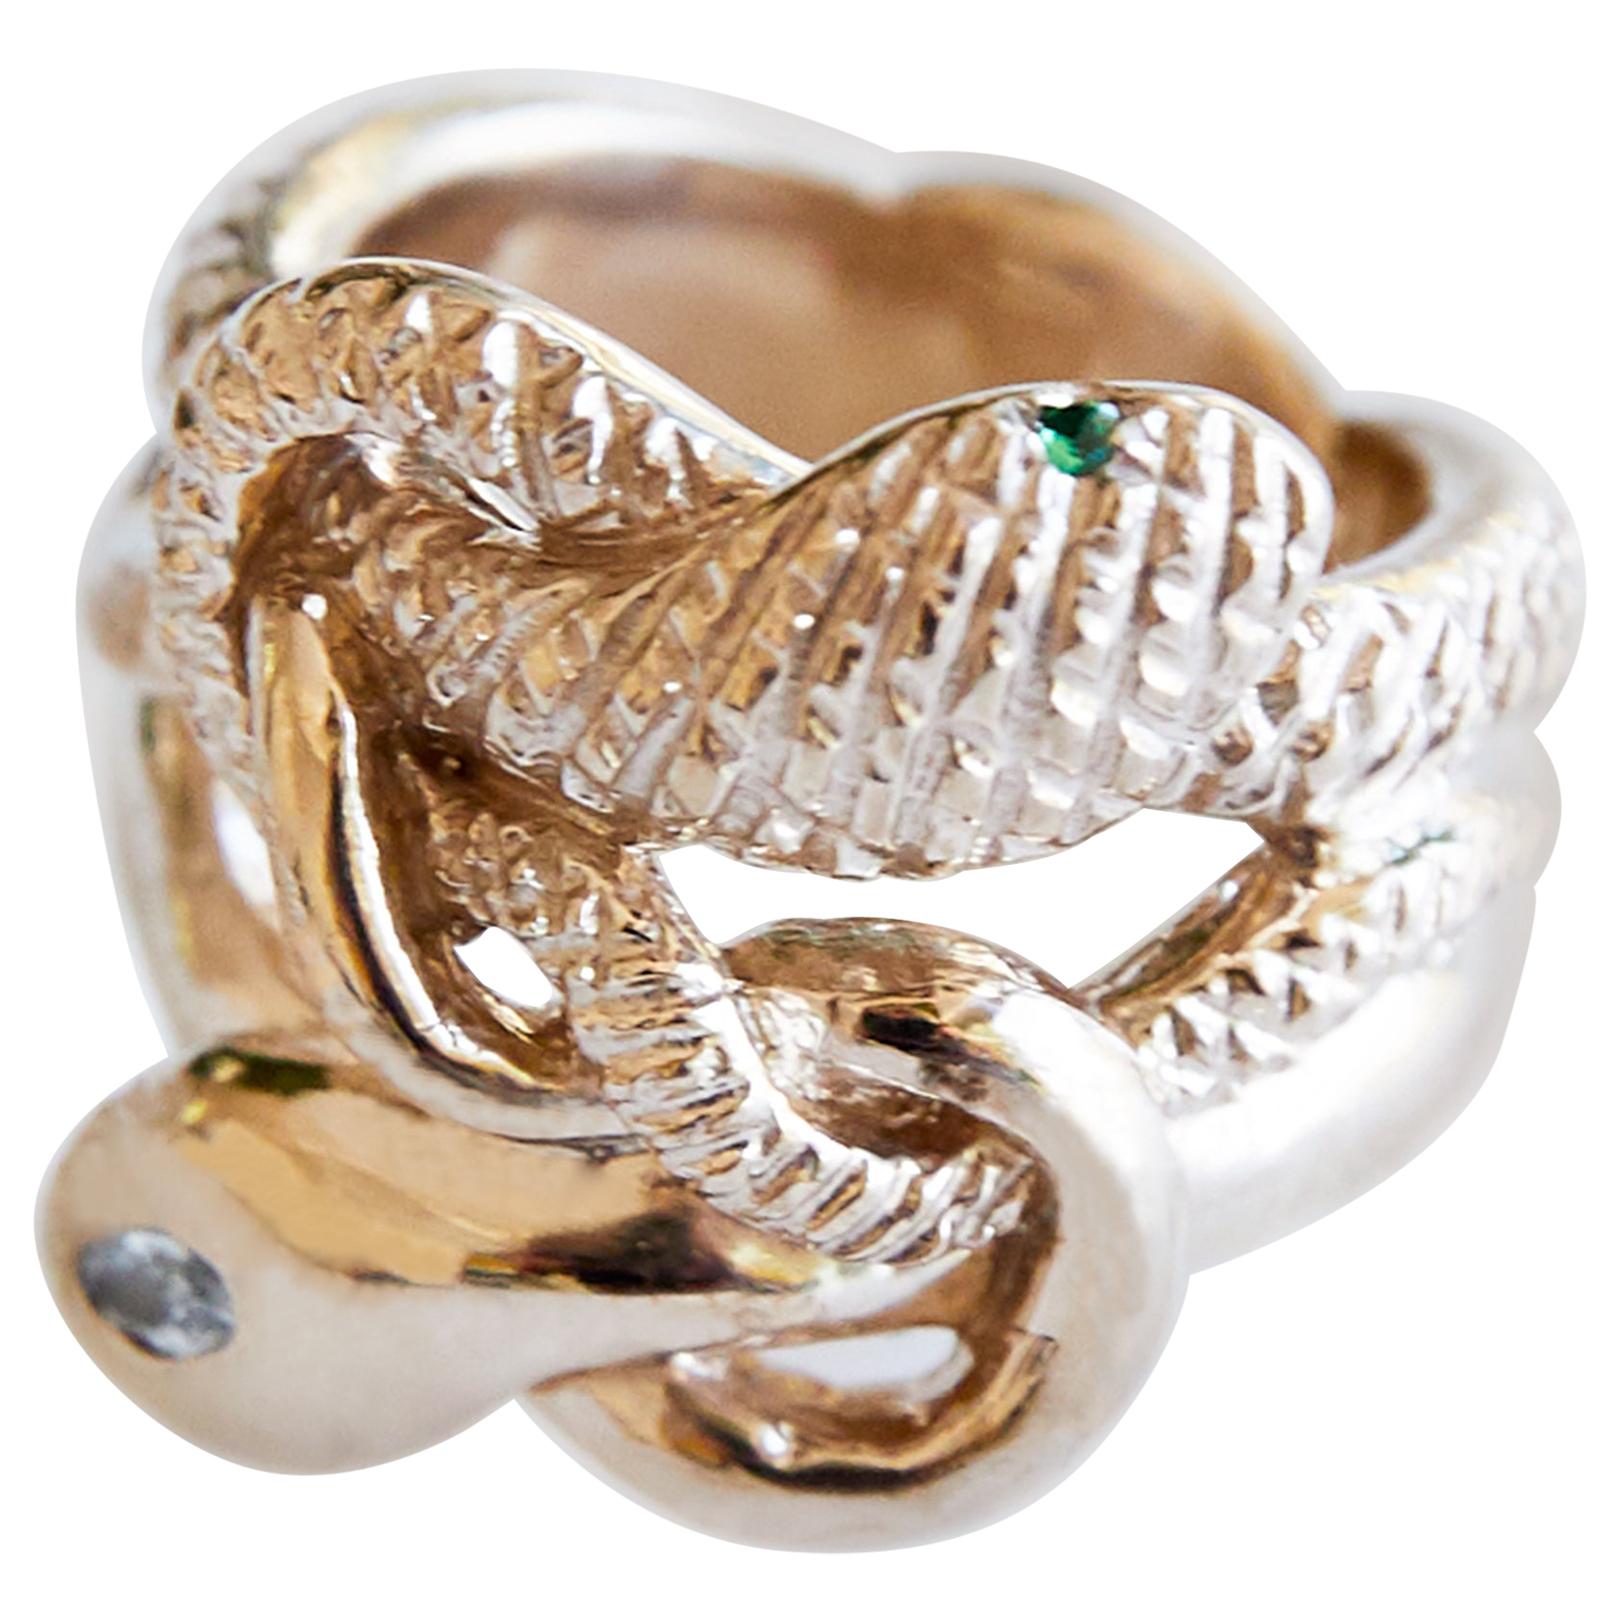 White Diamond Marquis Emerald Ruby Eyes Snake Cocktail Ring Victorian Style Bronze J Dauphin

1 Marquis Cut White Diamond 2 pcs Emerald as eyes and 2 pcs Ruby as eyes on second snake
J DAUPHIN Signature Ring 